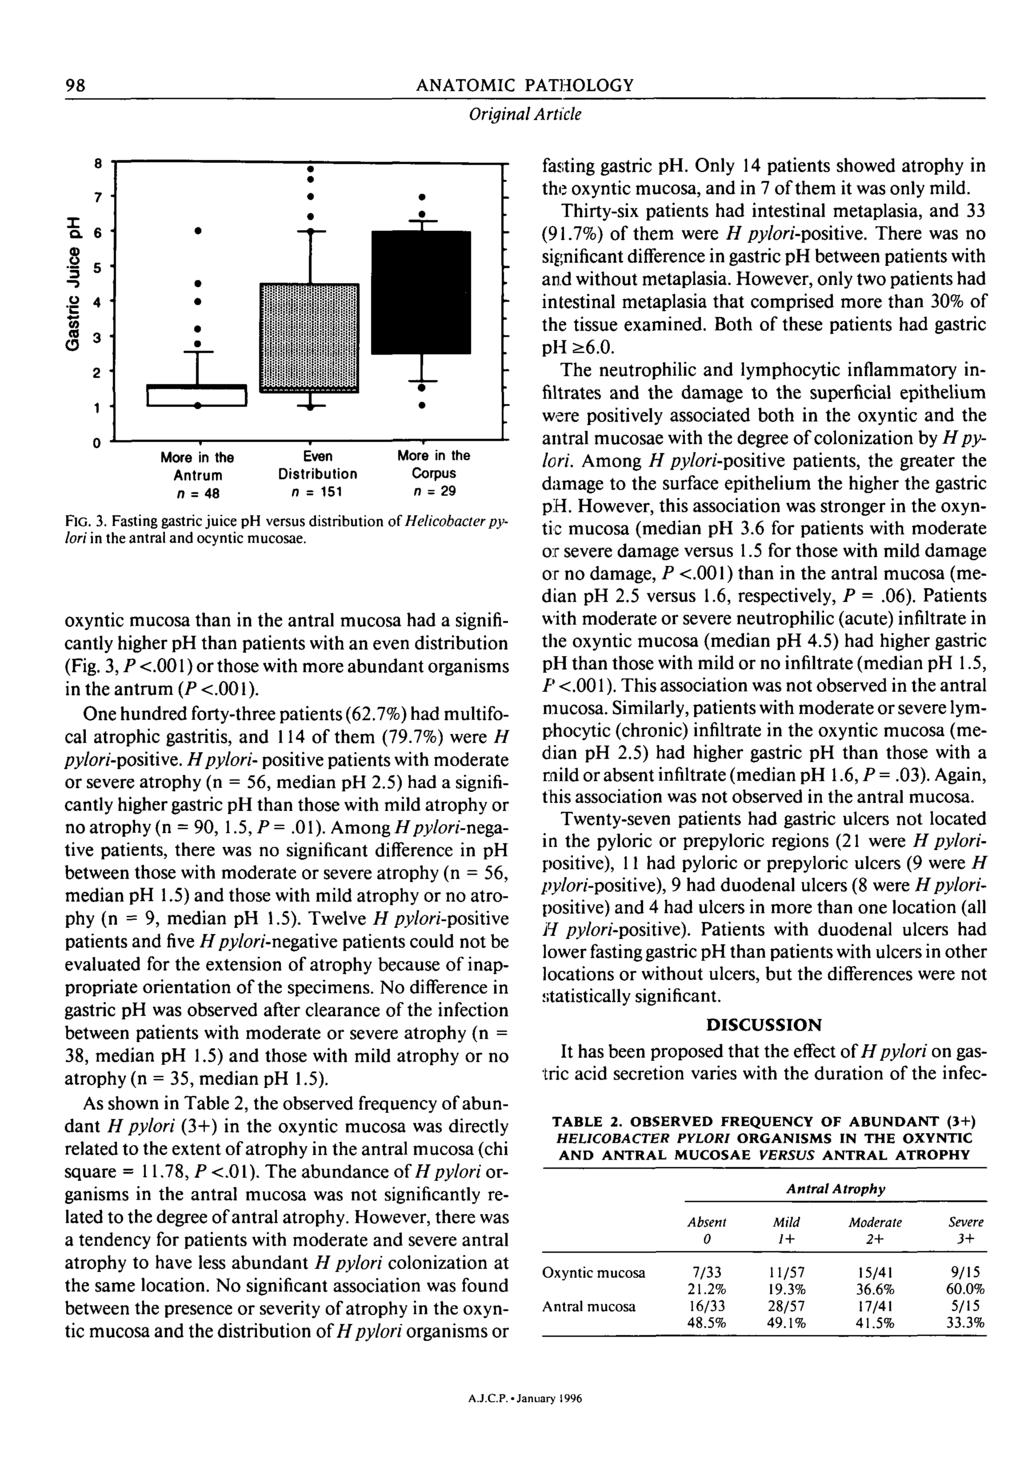 98 ANATOMIC PATHOLOGY Original Article 8 7 ie 8.. 5 3 ico o. o 3 2,-JL- 1 1 ' More in the Antrum n = 48 t m Even Distribution n = 151 More in the Corpus n = 29 FIG. 3. Fasting gastric juice ph versus distribution of Helicobacter pylori in the antral and ocyntic mucosae.